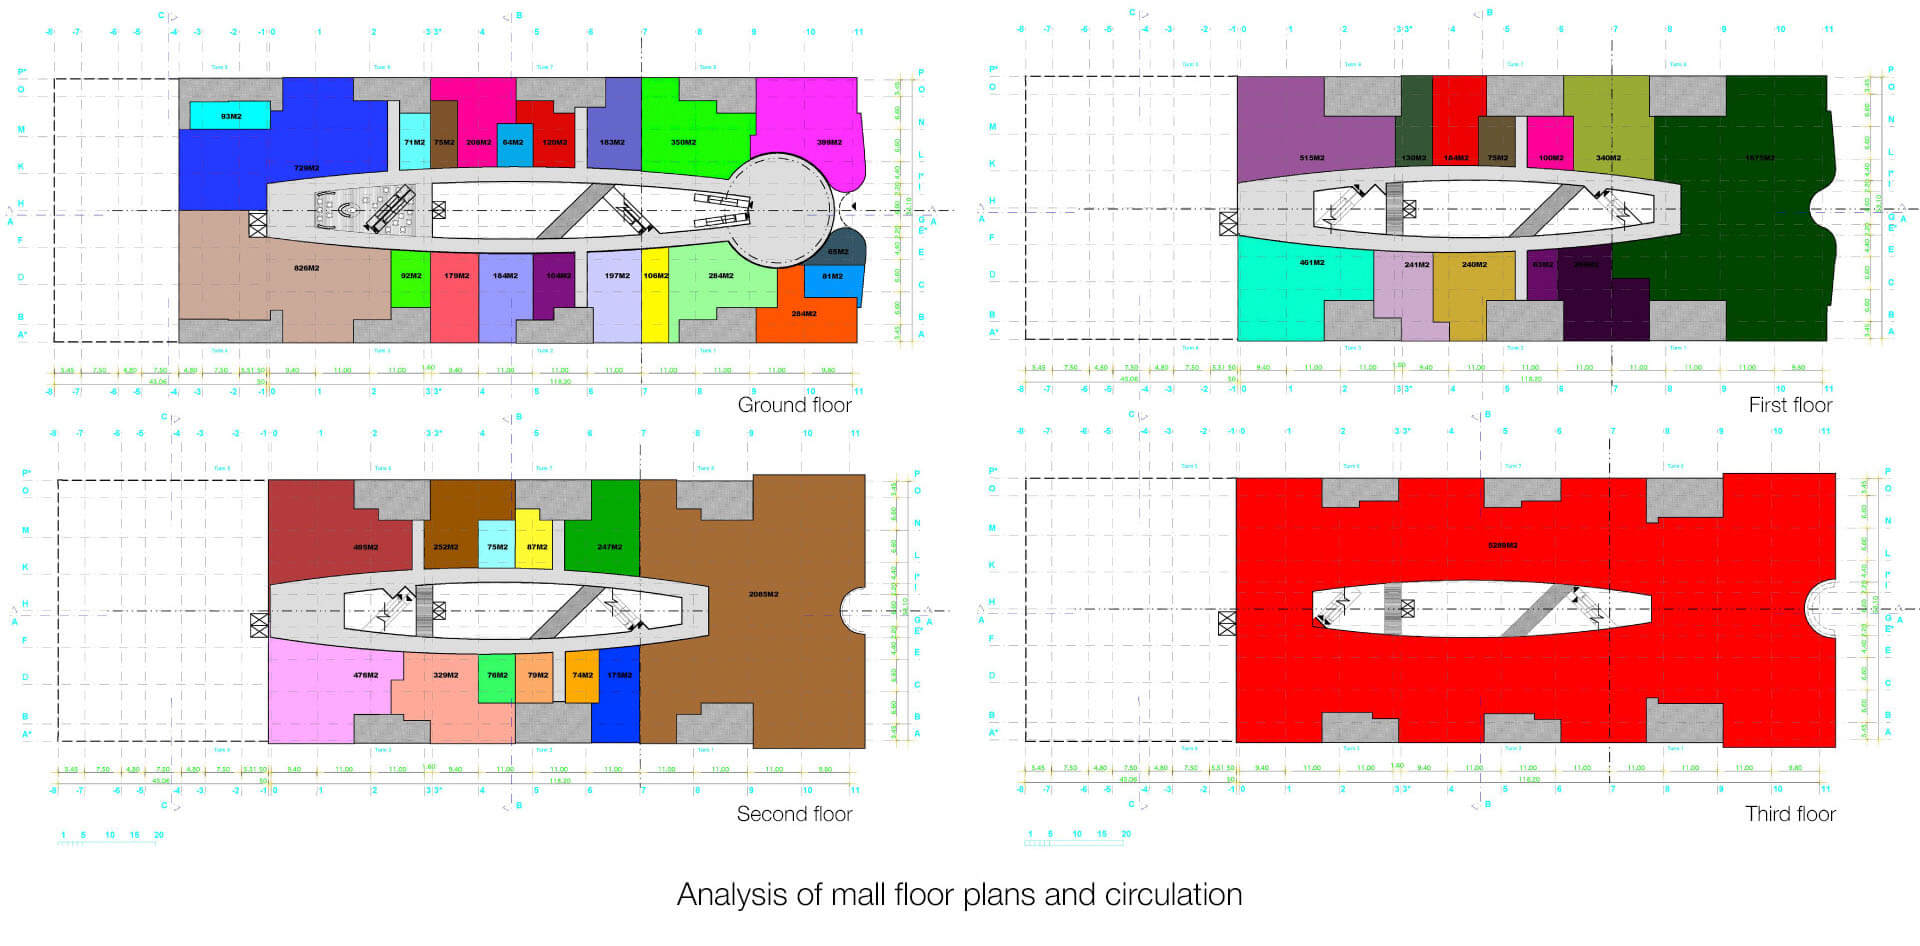 Hammerson shopping mall architecture format planning customer flows